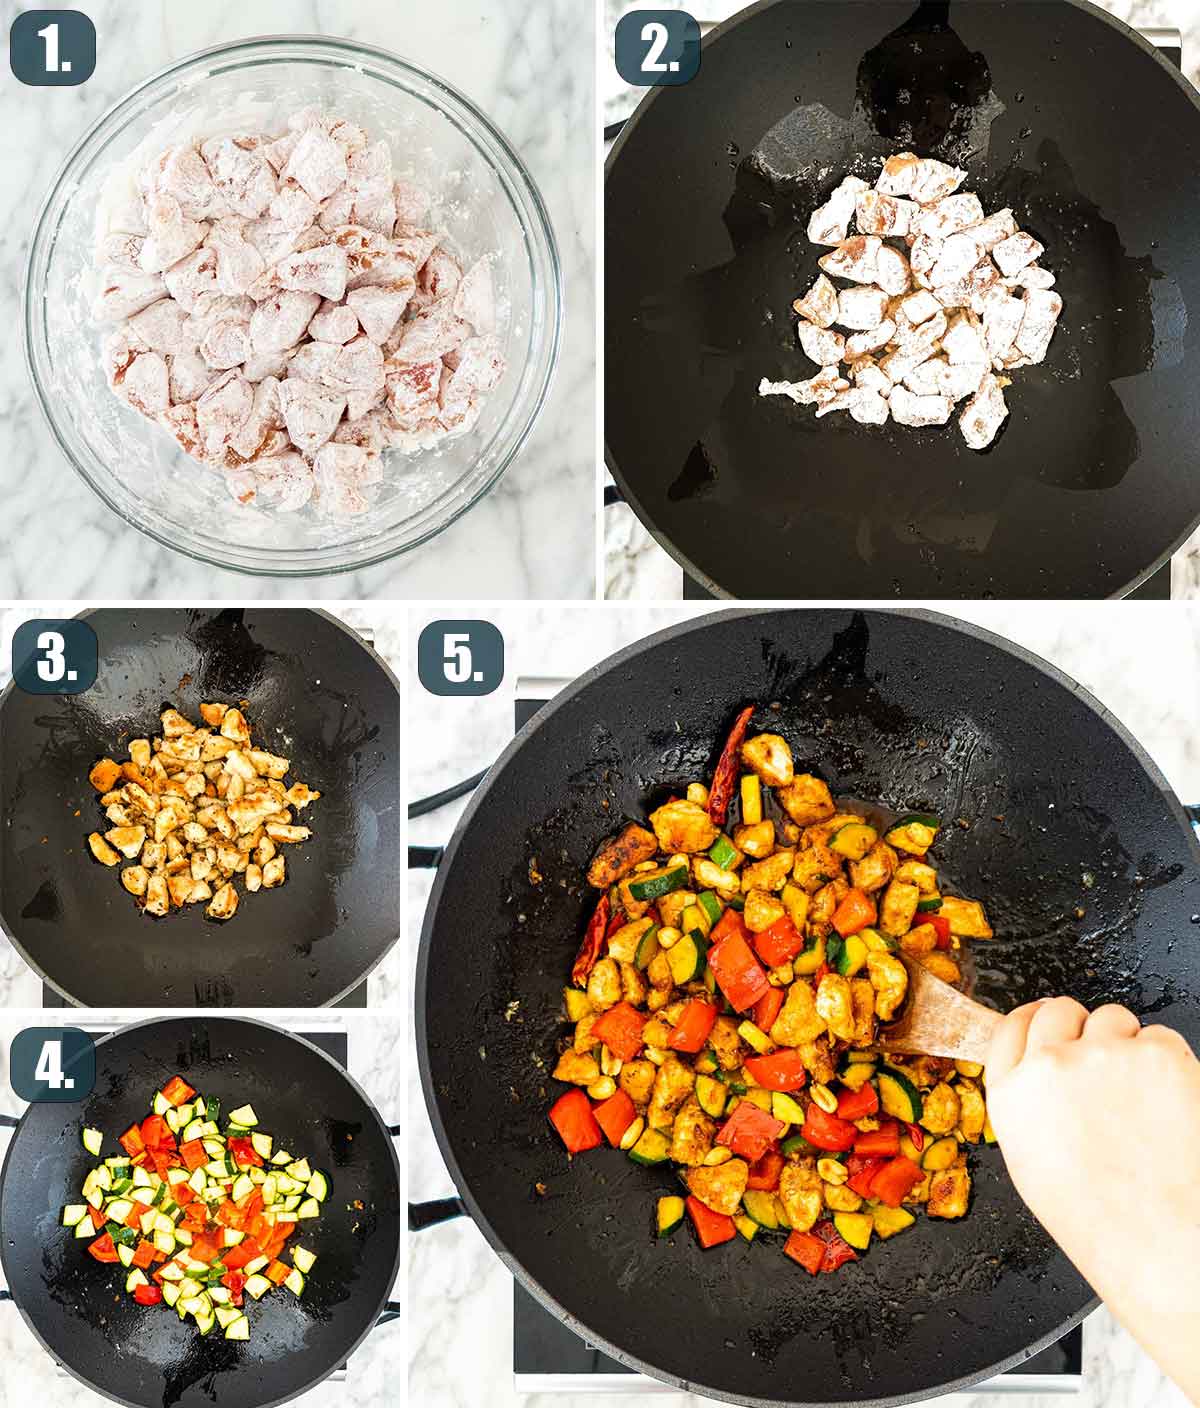 detailed process shots showing how to make kung pao chicken.